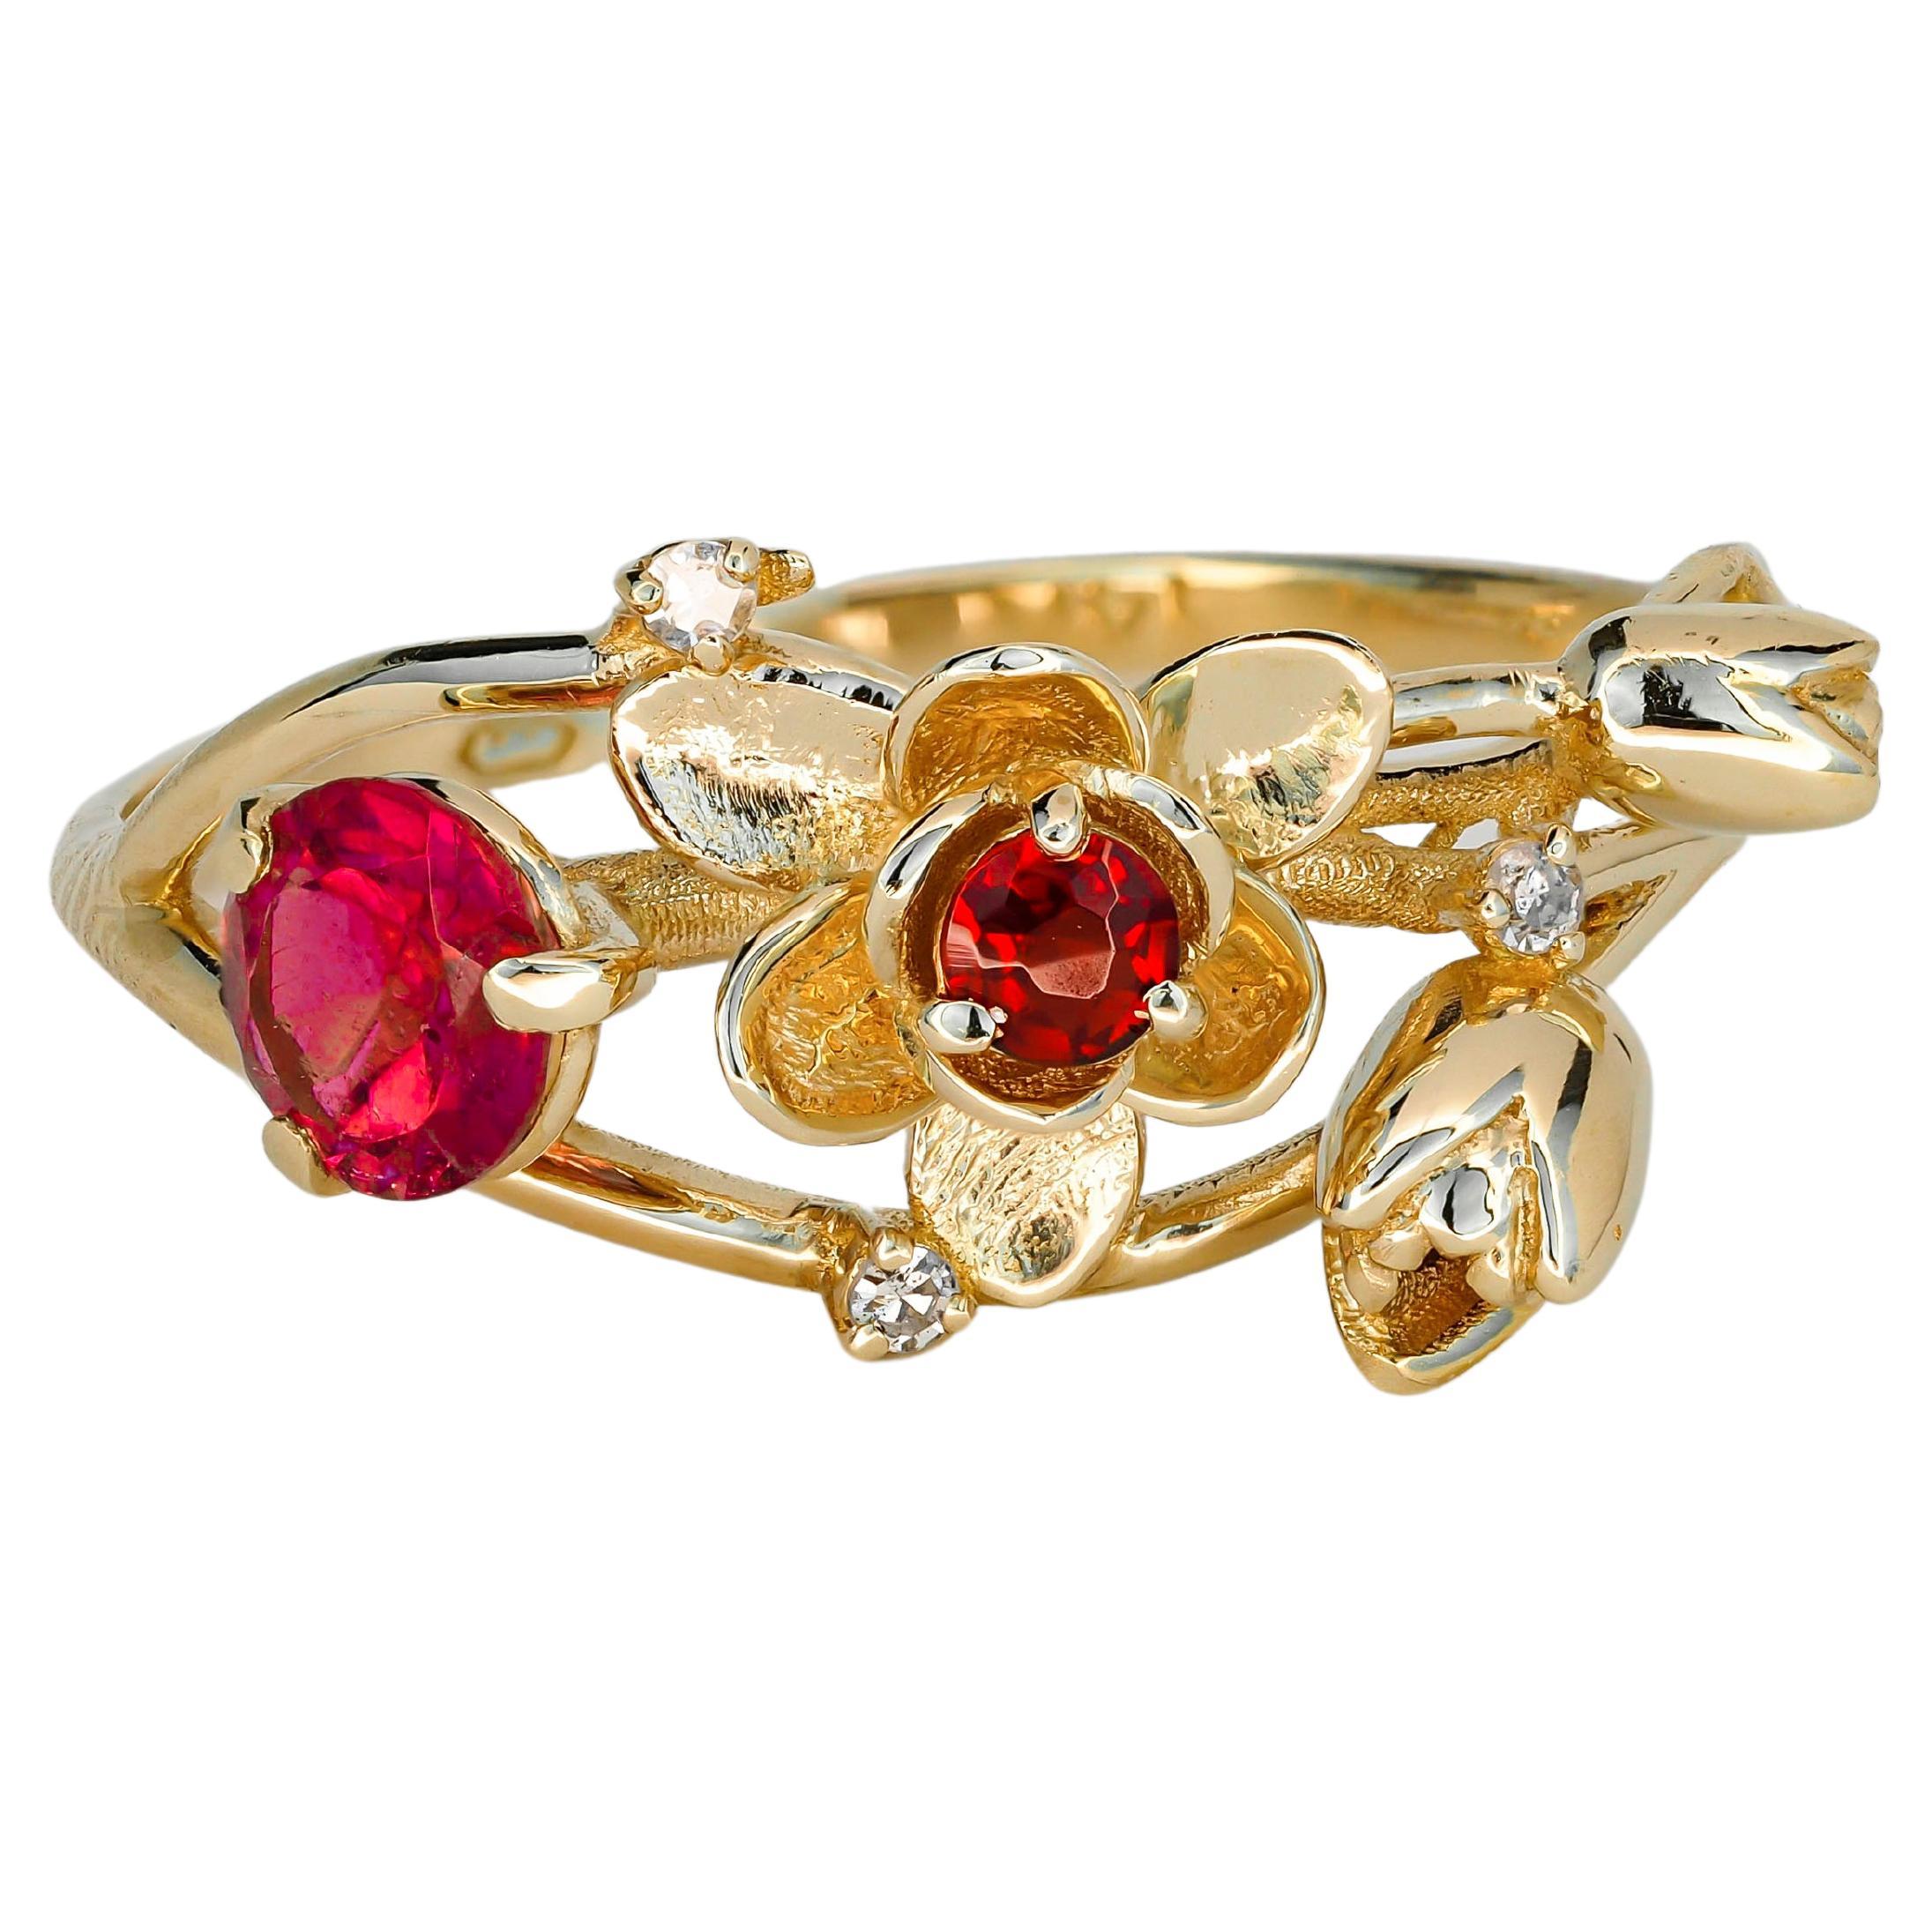 For Sale:  Ruby ring. 14k Gold Ring with Ruby, Garnet and Diamonds. Orchid Flower Ring.